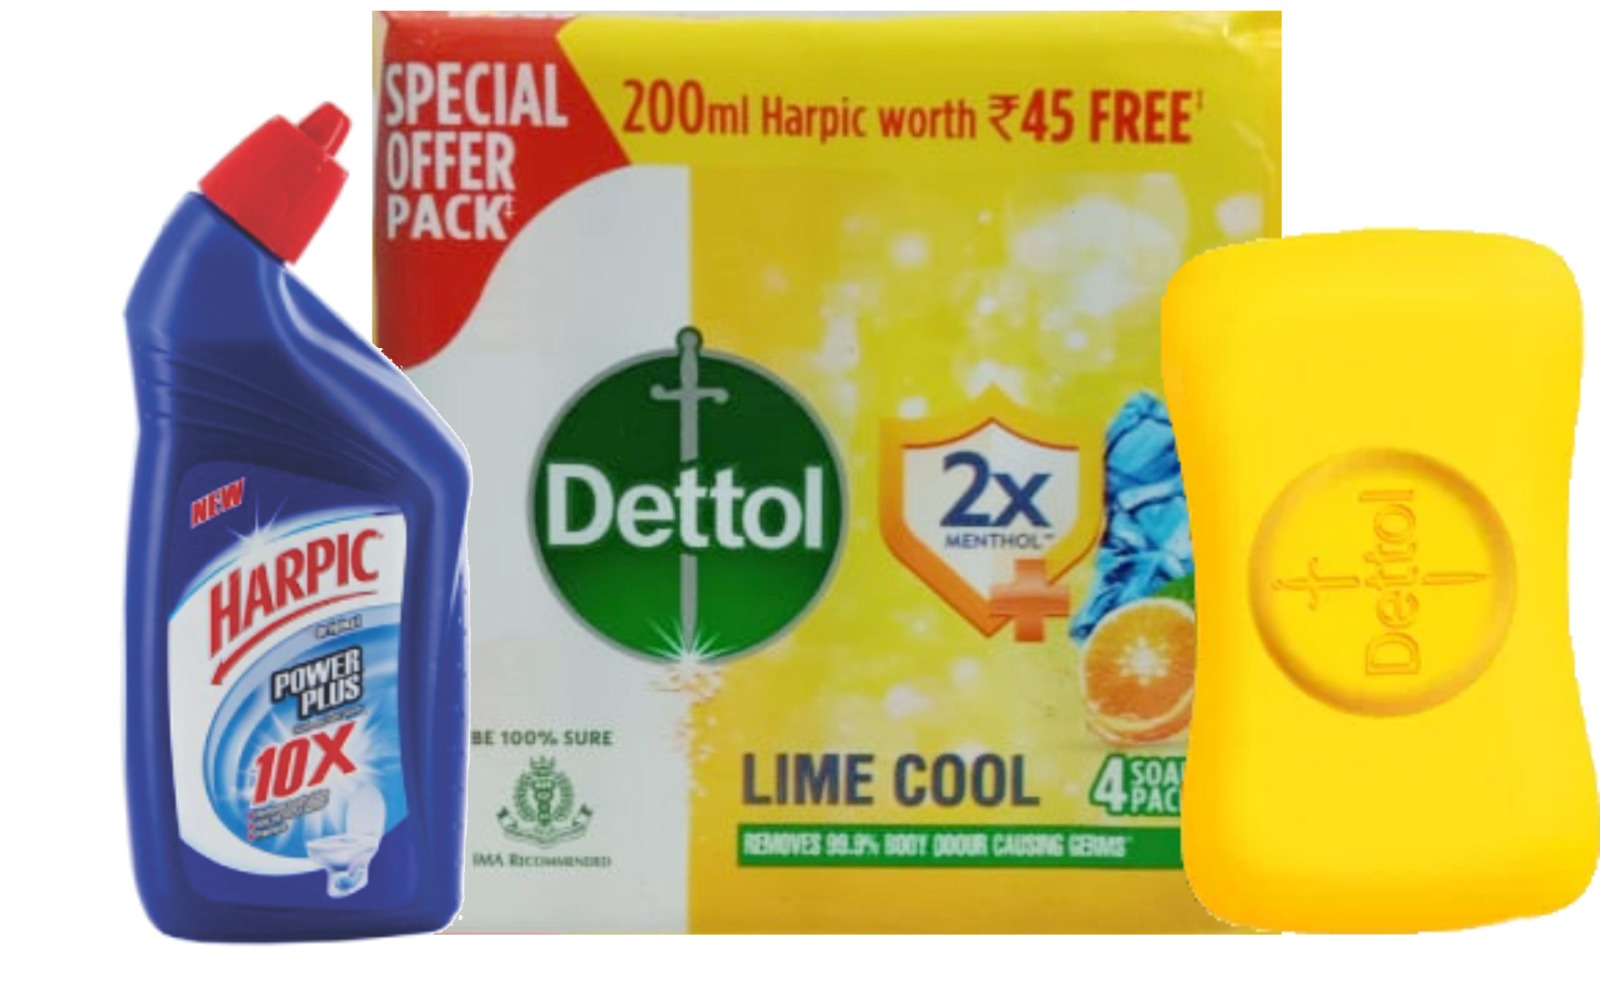 Dettol Lime Cool Soap Bar, 75gx4 and 200ml Harpic Free